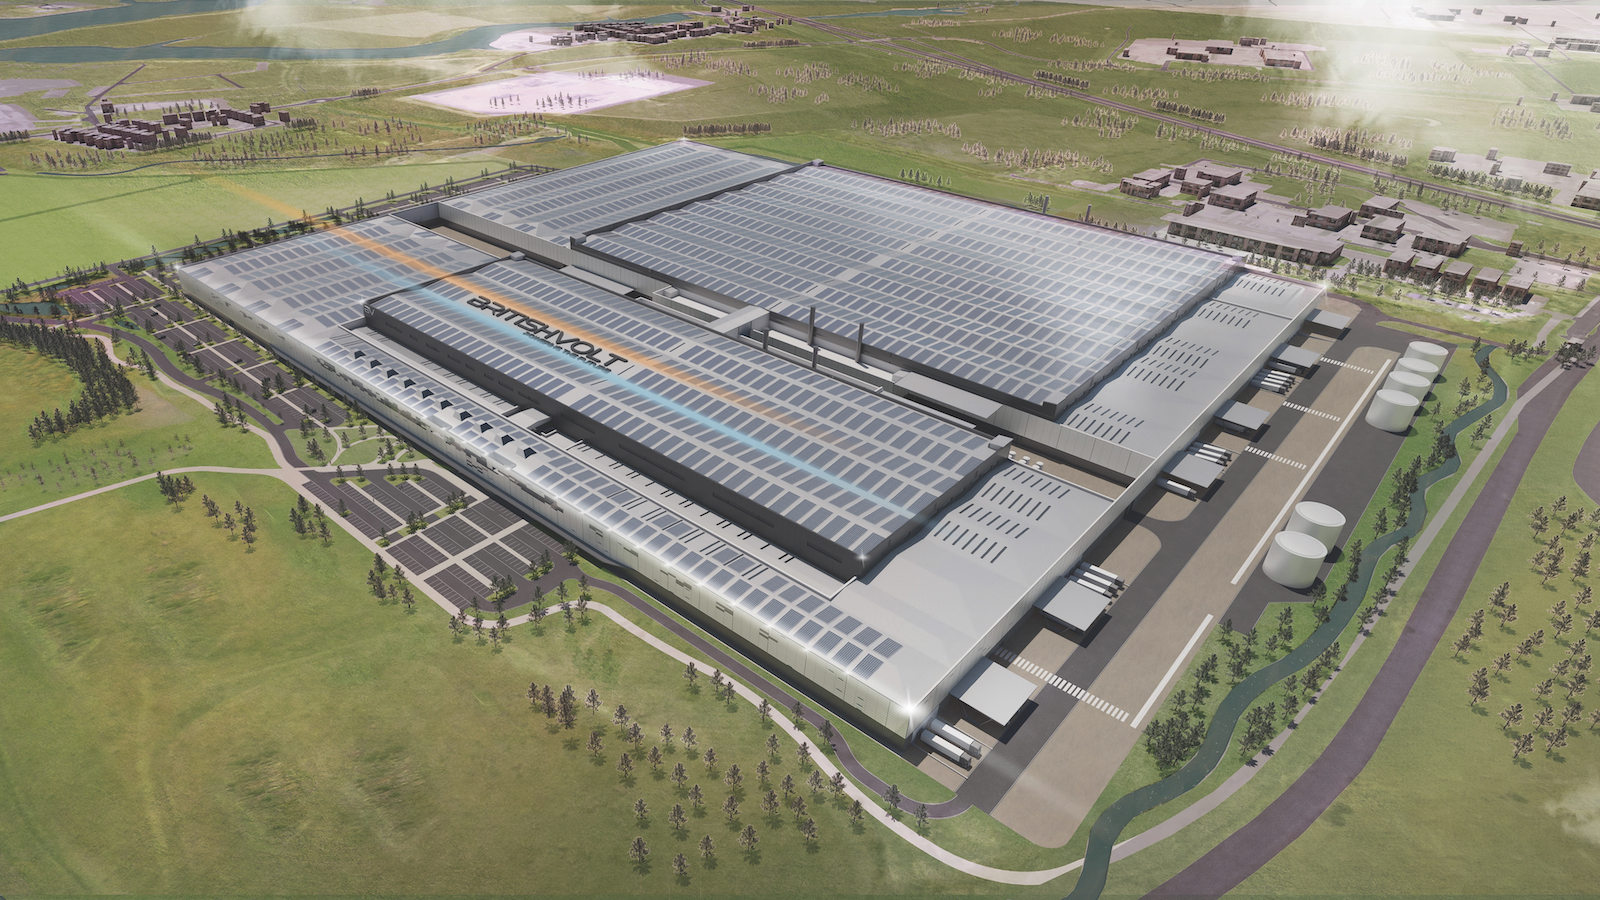 ISG’s gigaplant for Britishvolt will cover a 95ha site and require 31,000 tonnes of steel